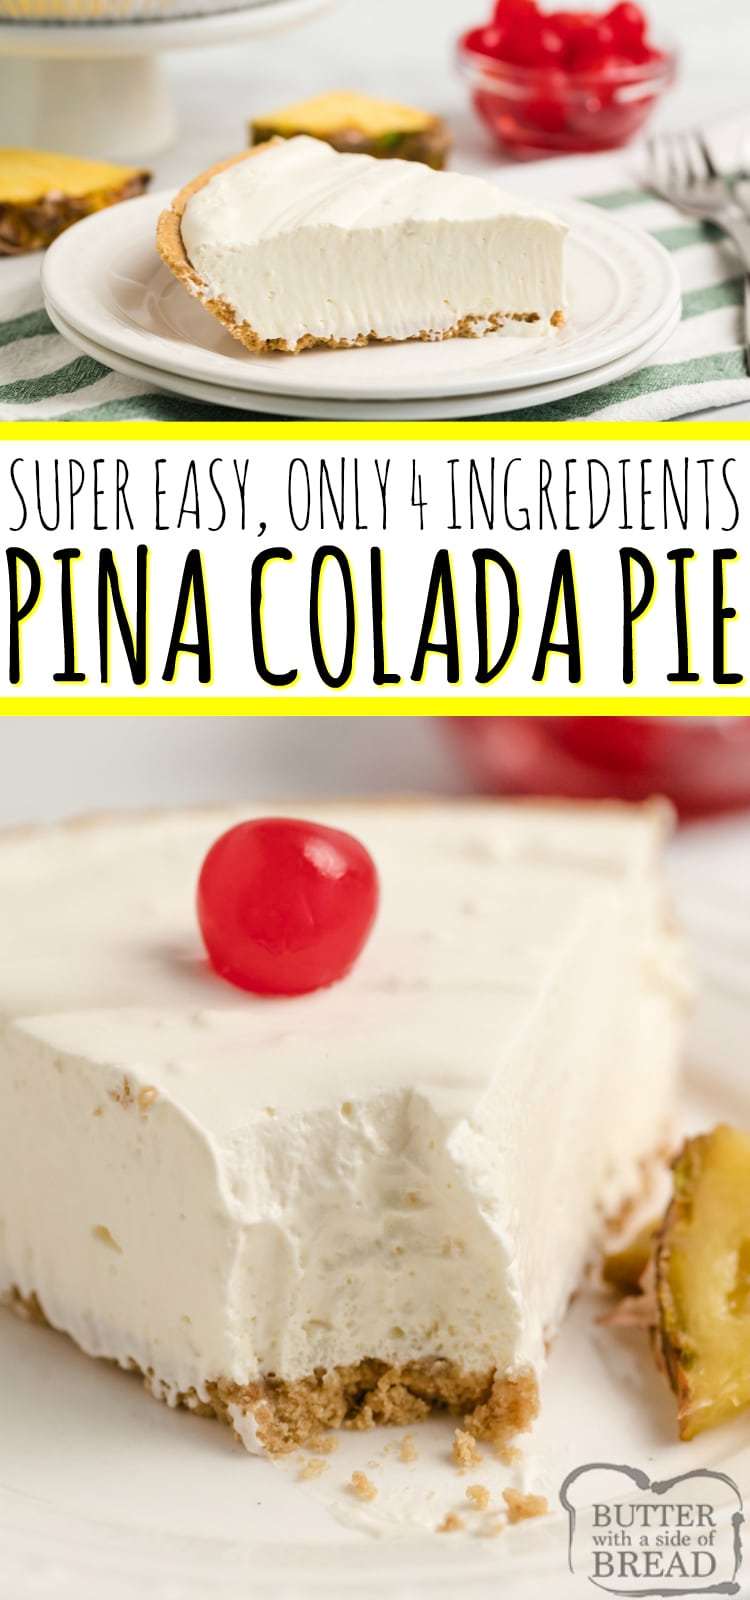 Easy Pina Colada Pie is a no bake dessert with only 4 ingredients! Everyone loves the fun tropical flavors of this simple, chilled pie recipe that only takes a few minutes to make!